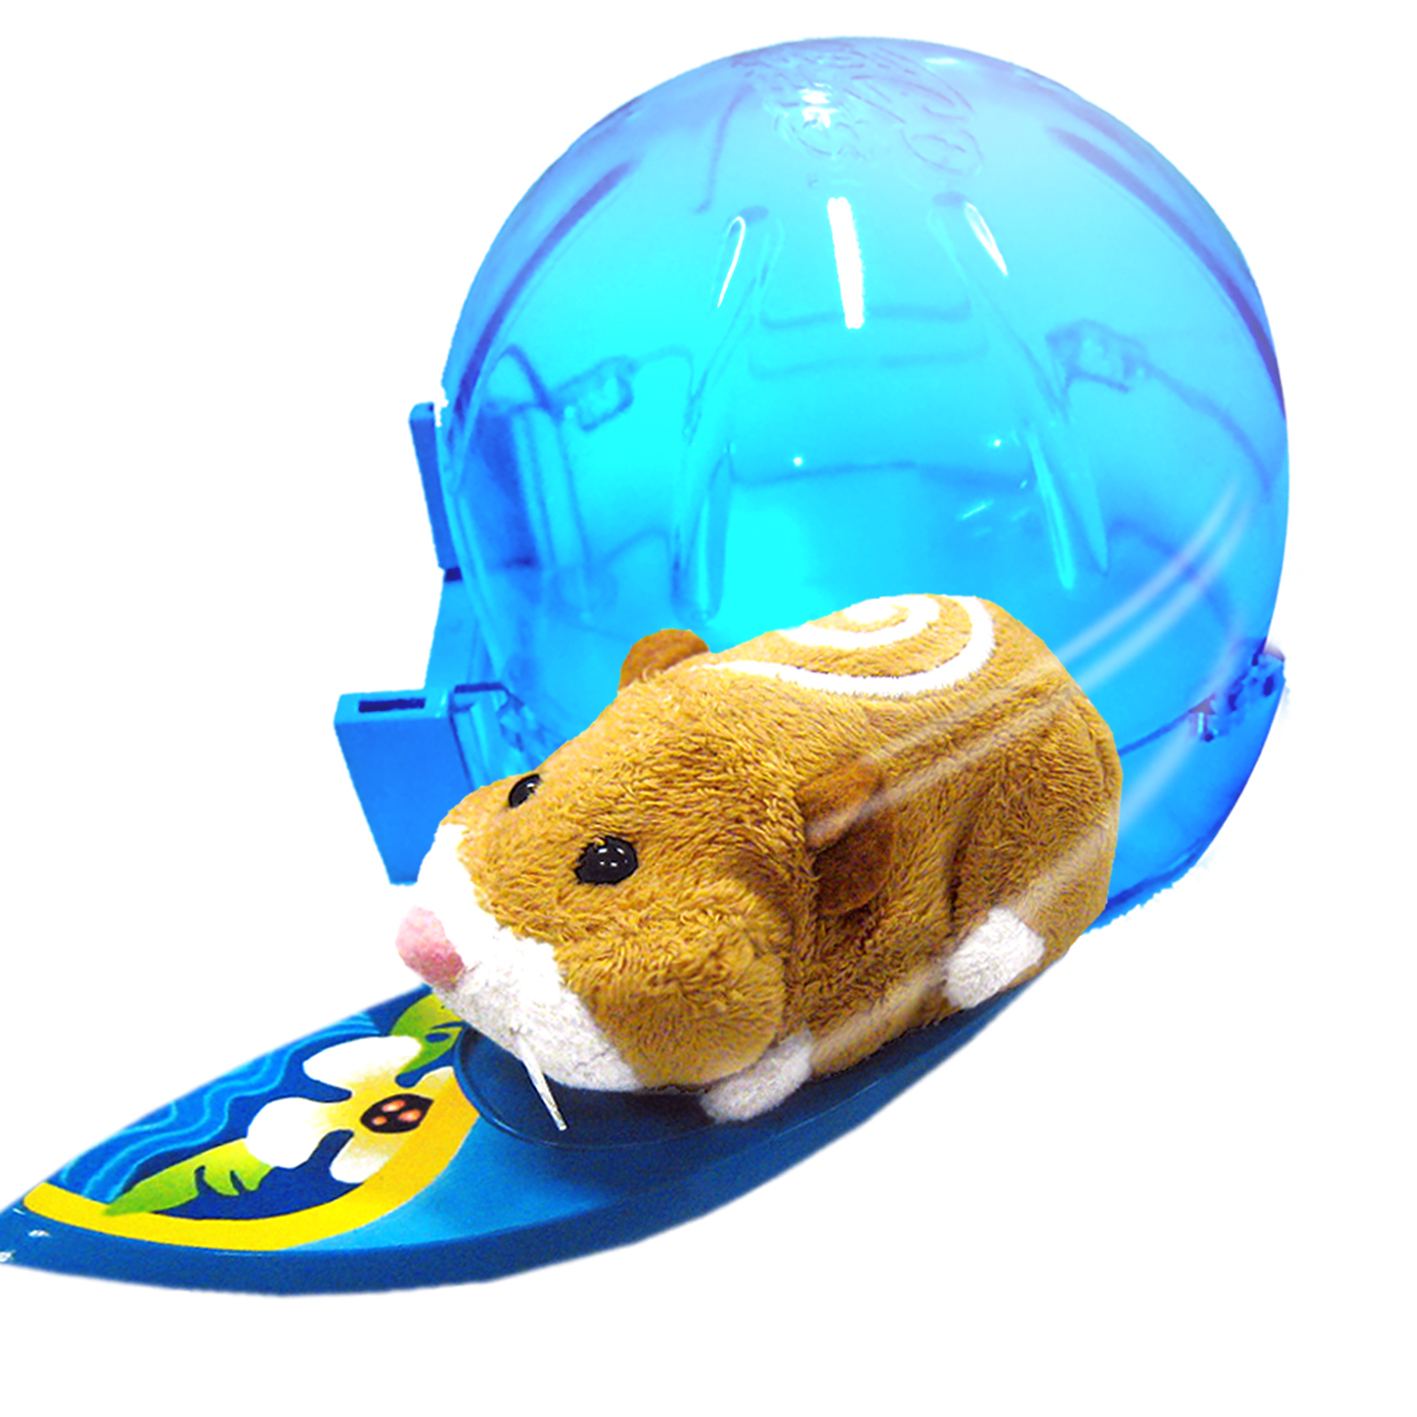 Unbranded Hamster Playset - Surfboard and Sleep Dome